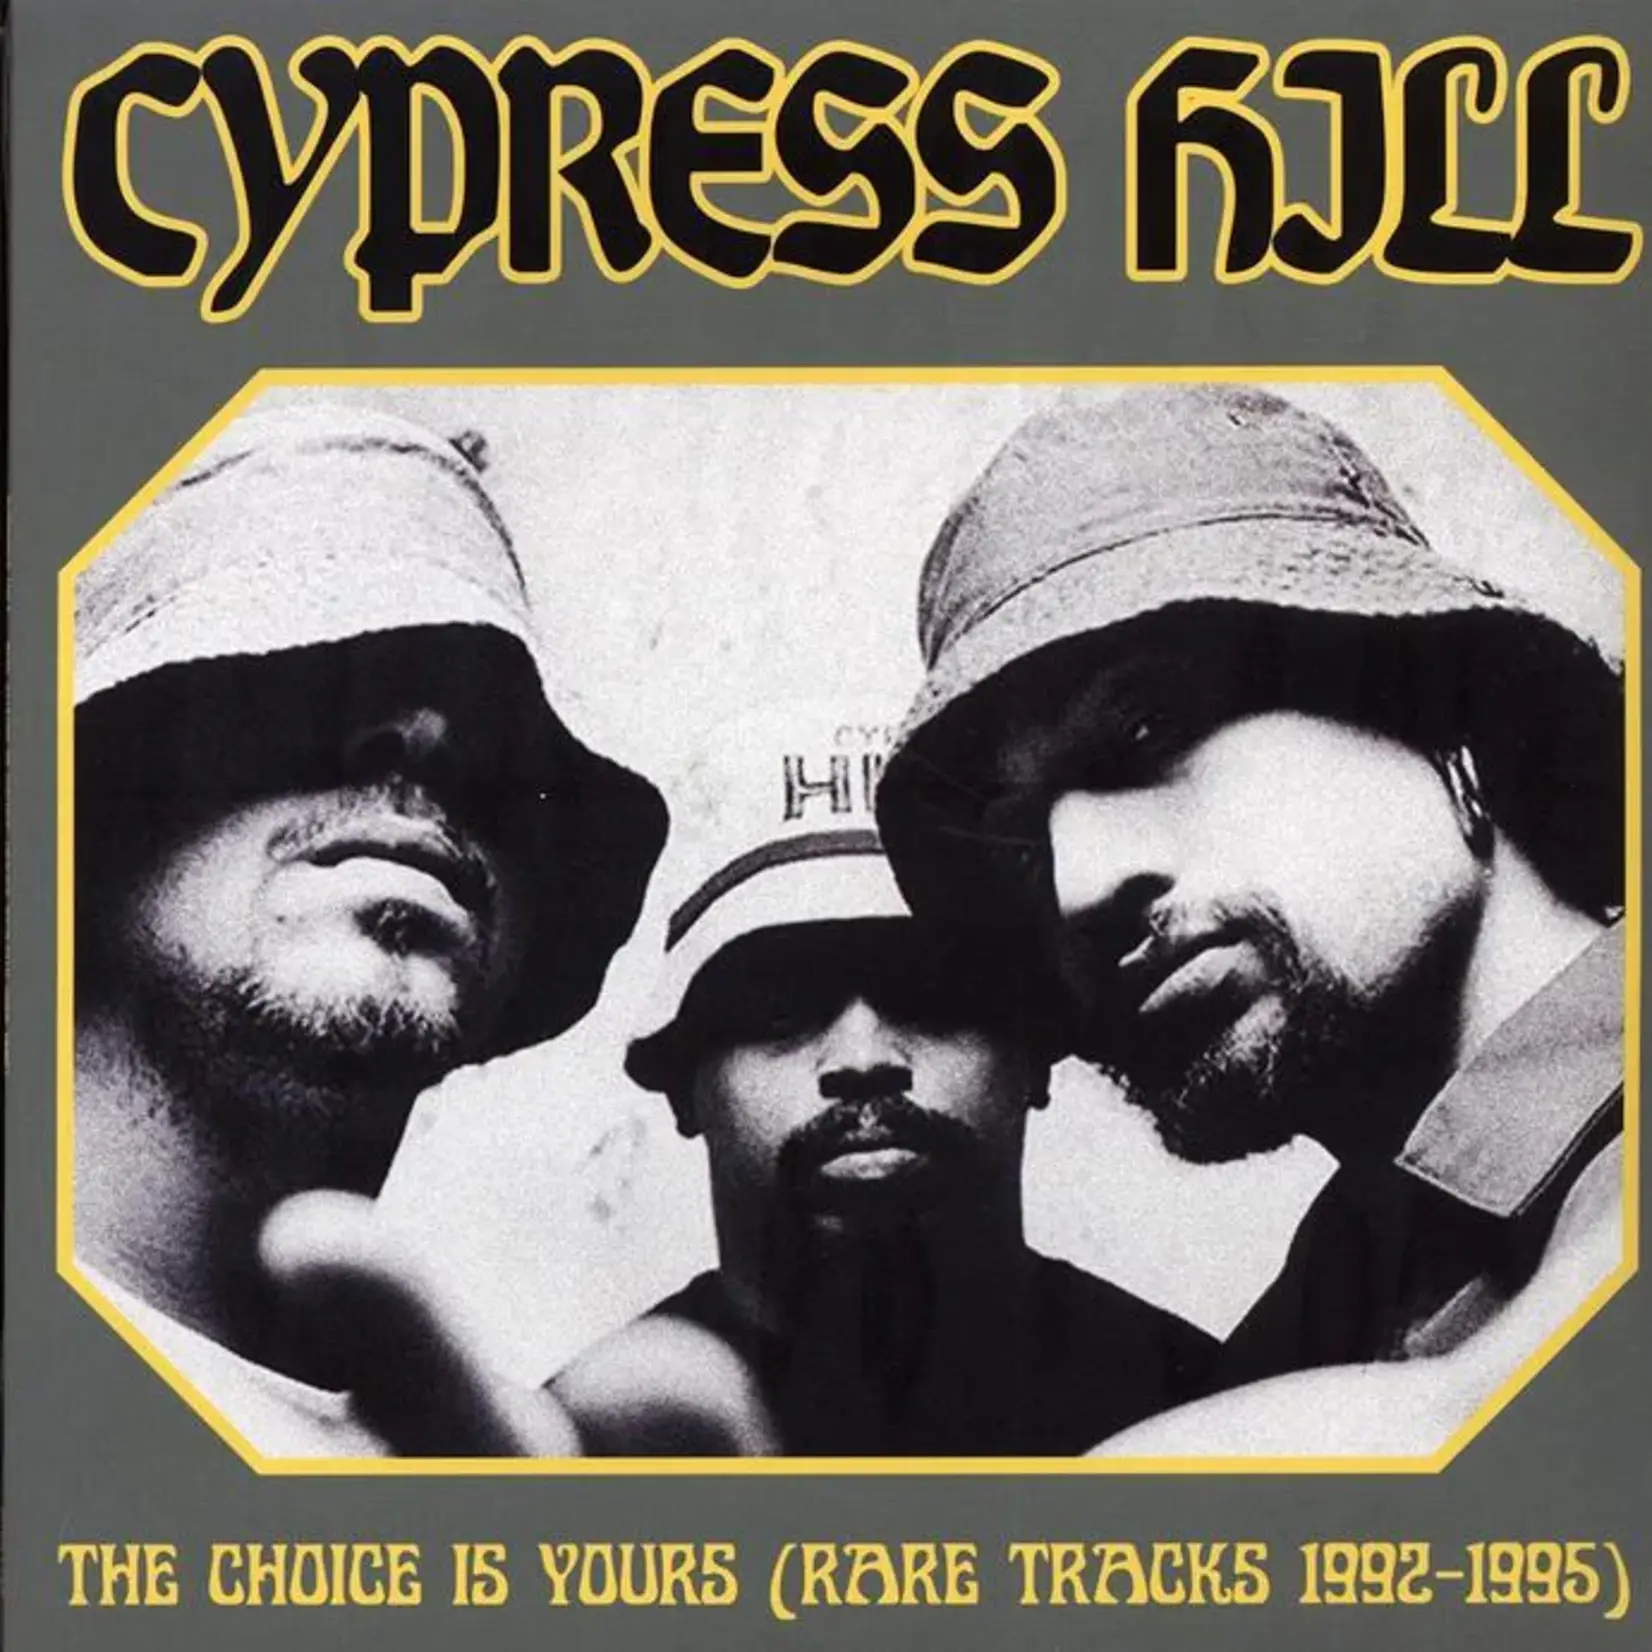 Cypress Hill – The Choice Is Yours (Rare Tracks 1992-1995)